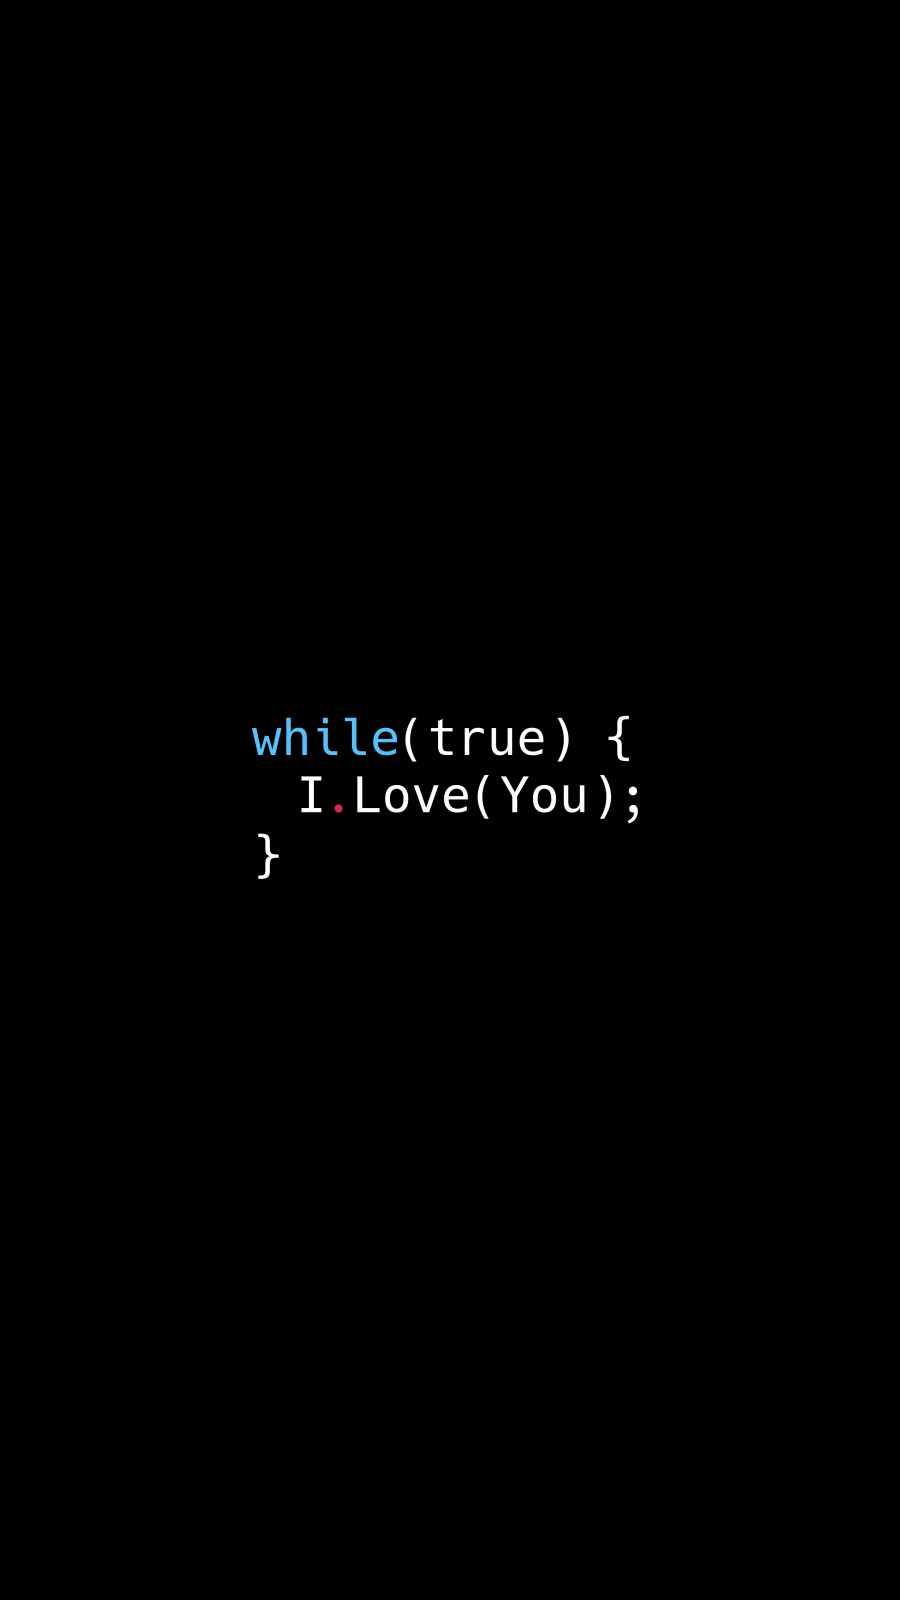 I Love You Code - IPhone Wallpapers : iPhone Wallpapers